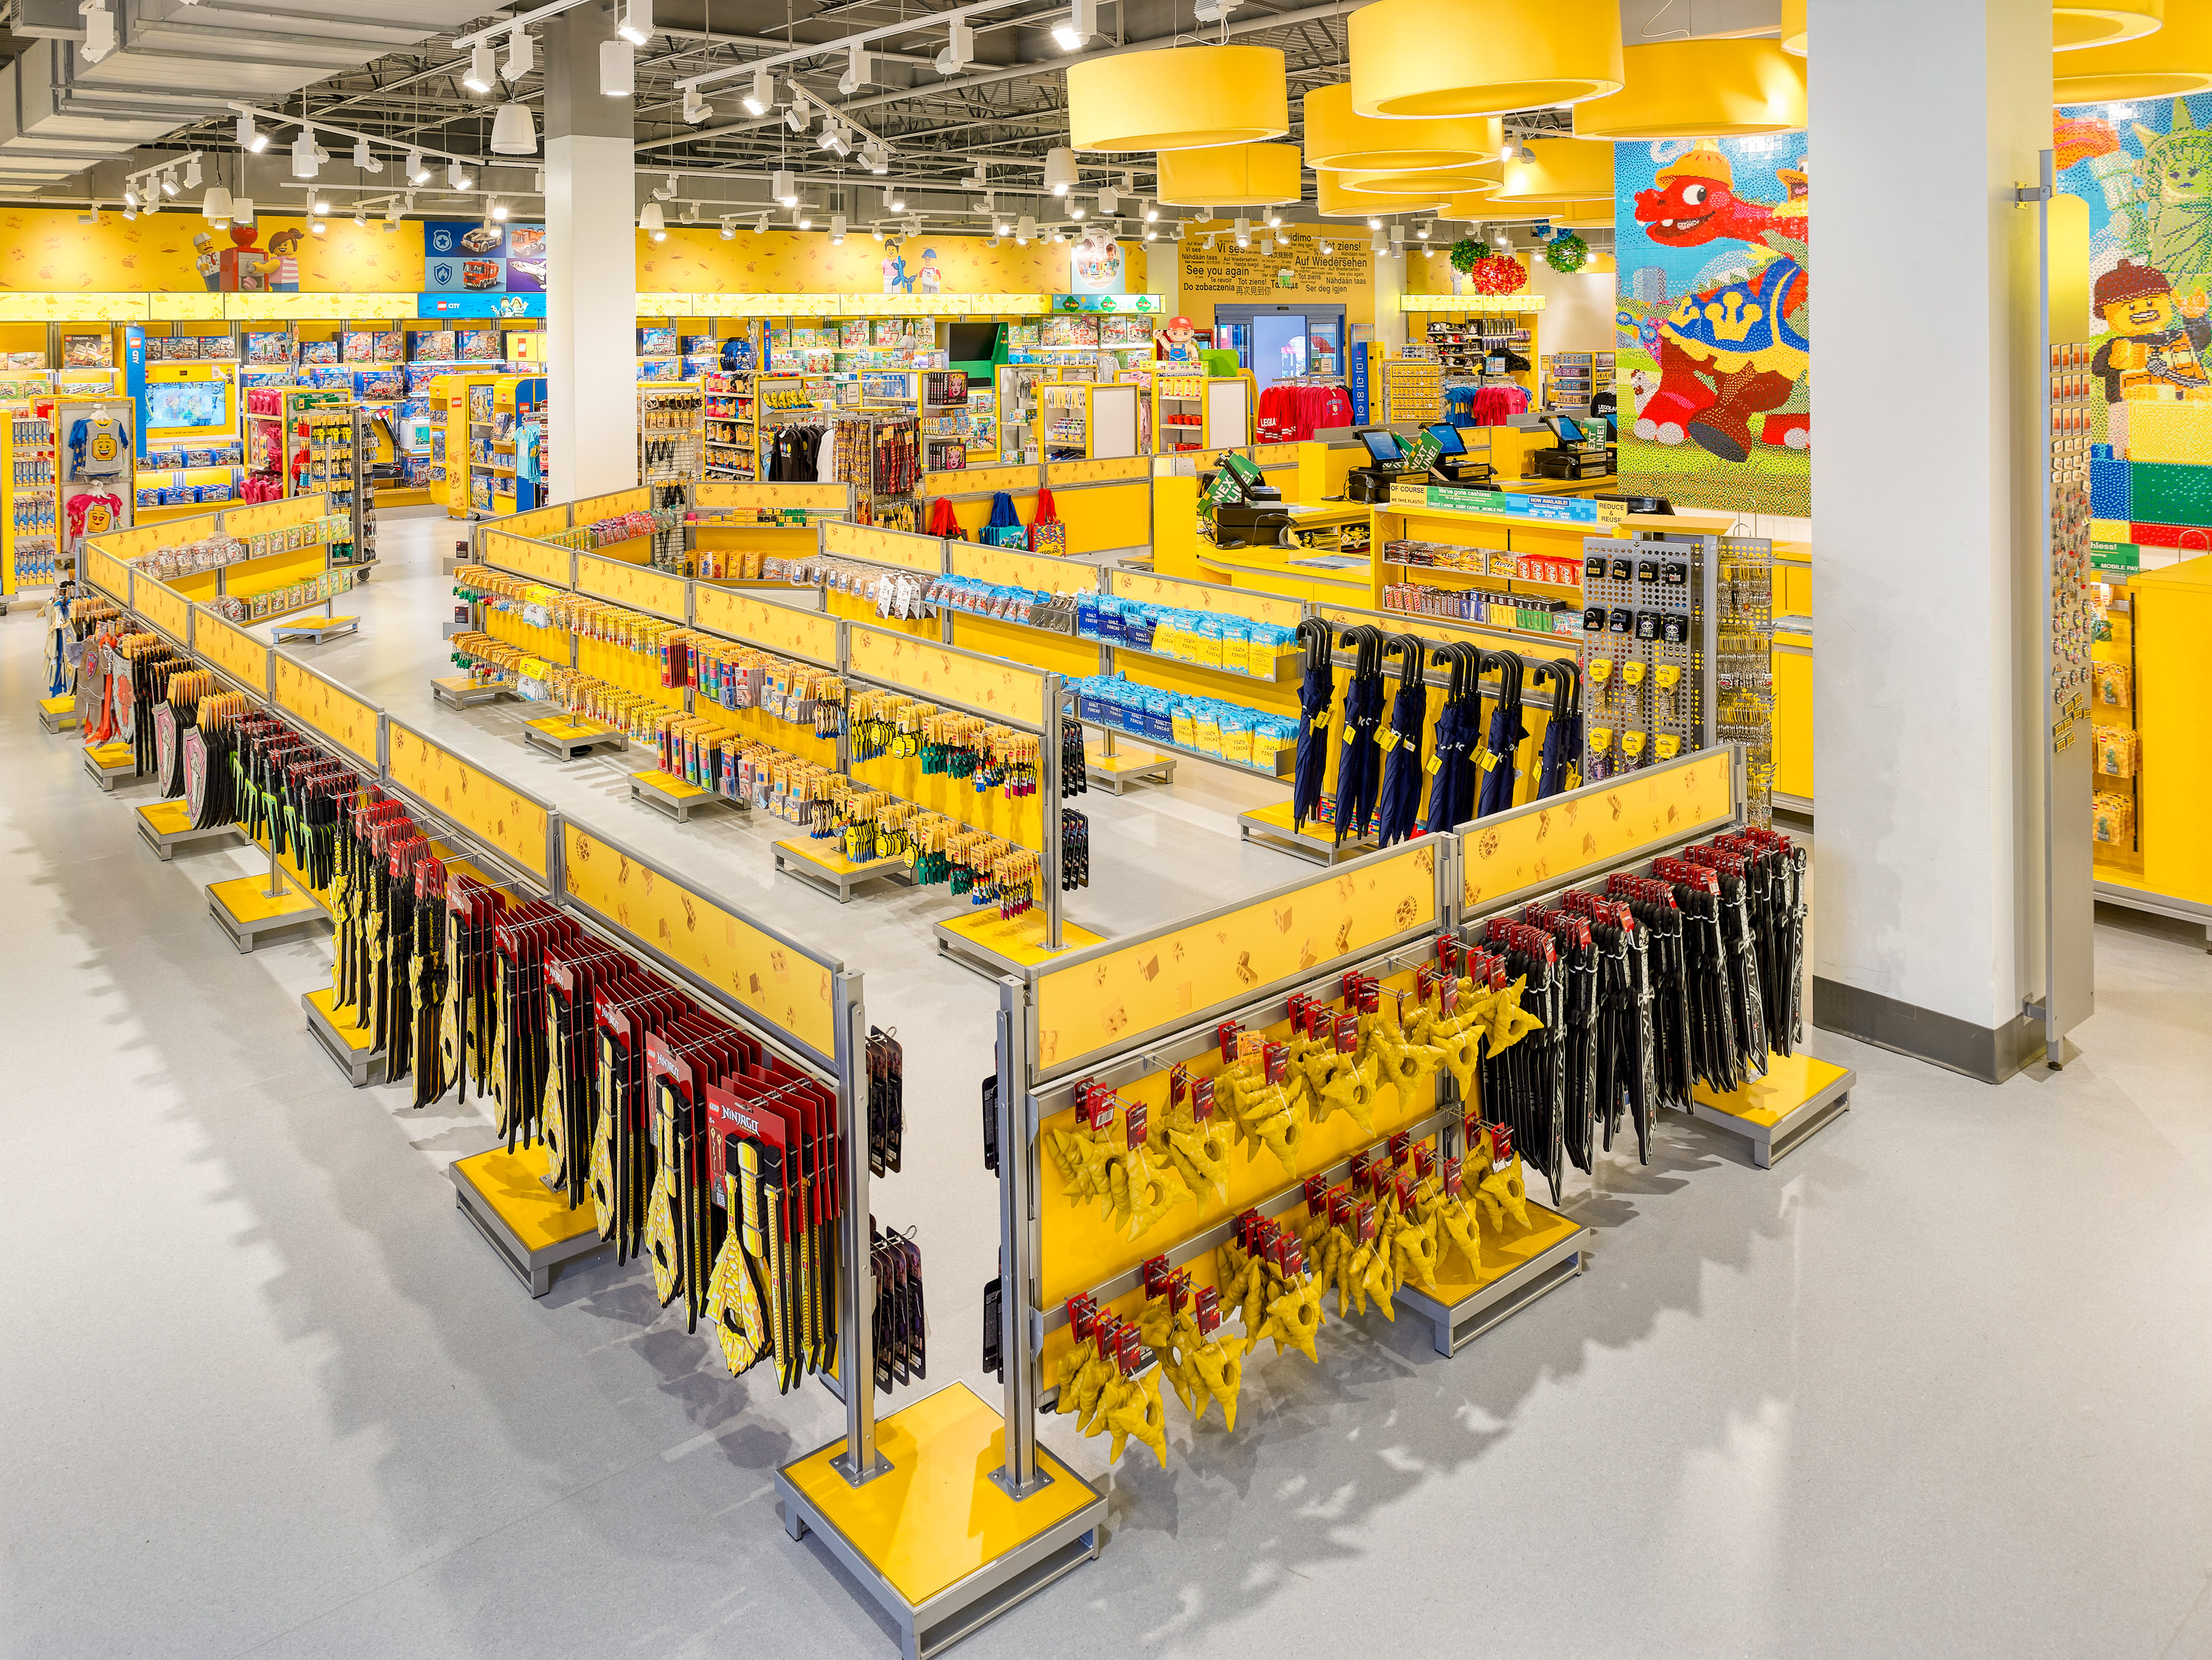 The Big Shop offers a wide selection of LEGO toys and merchandise